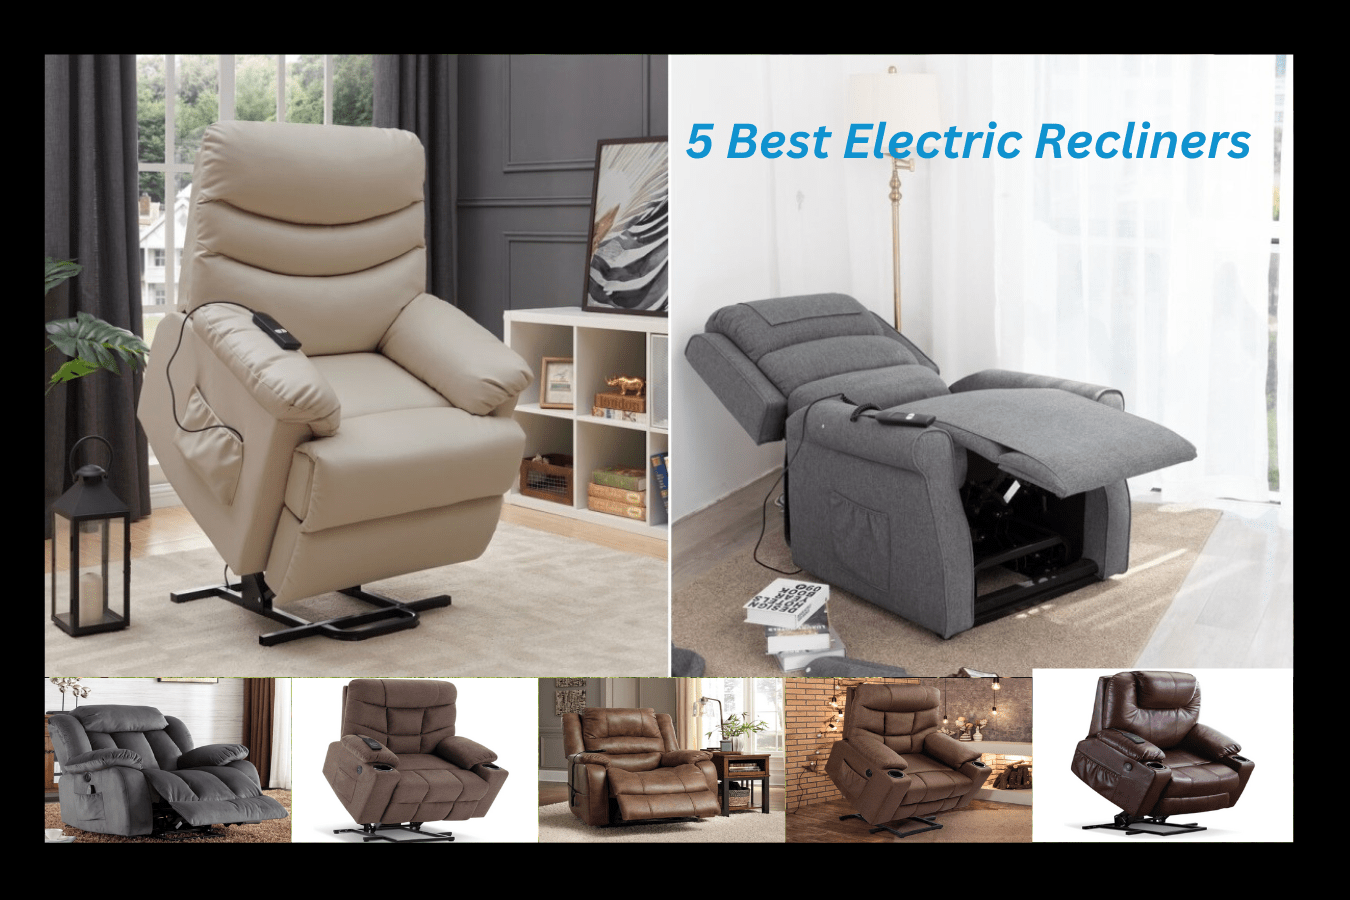 5 Best Electric Recliners